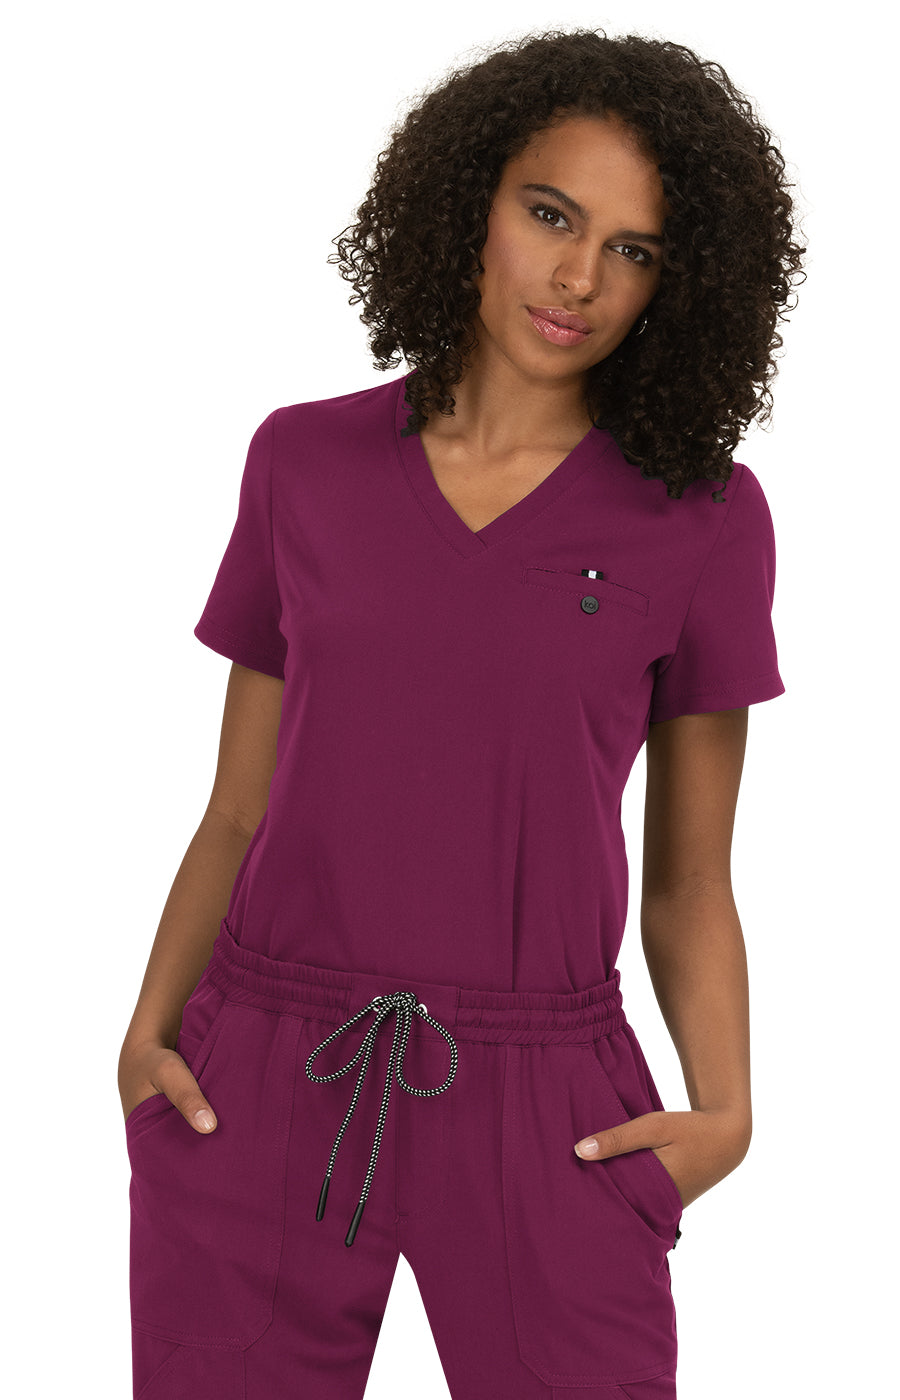 koi Ready to Work Top - Women's 1-Pocket Tuck In Scrub Top Women's Scrub Top koi Next Gen Wine XXS 